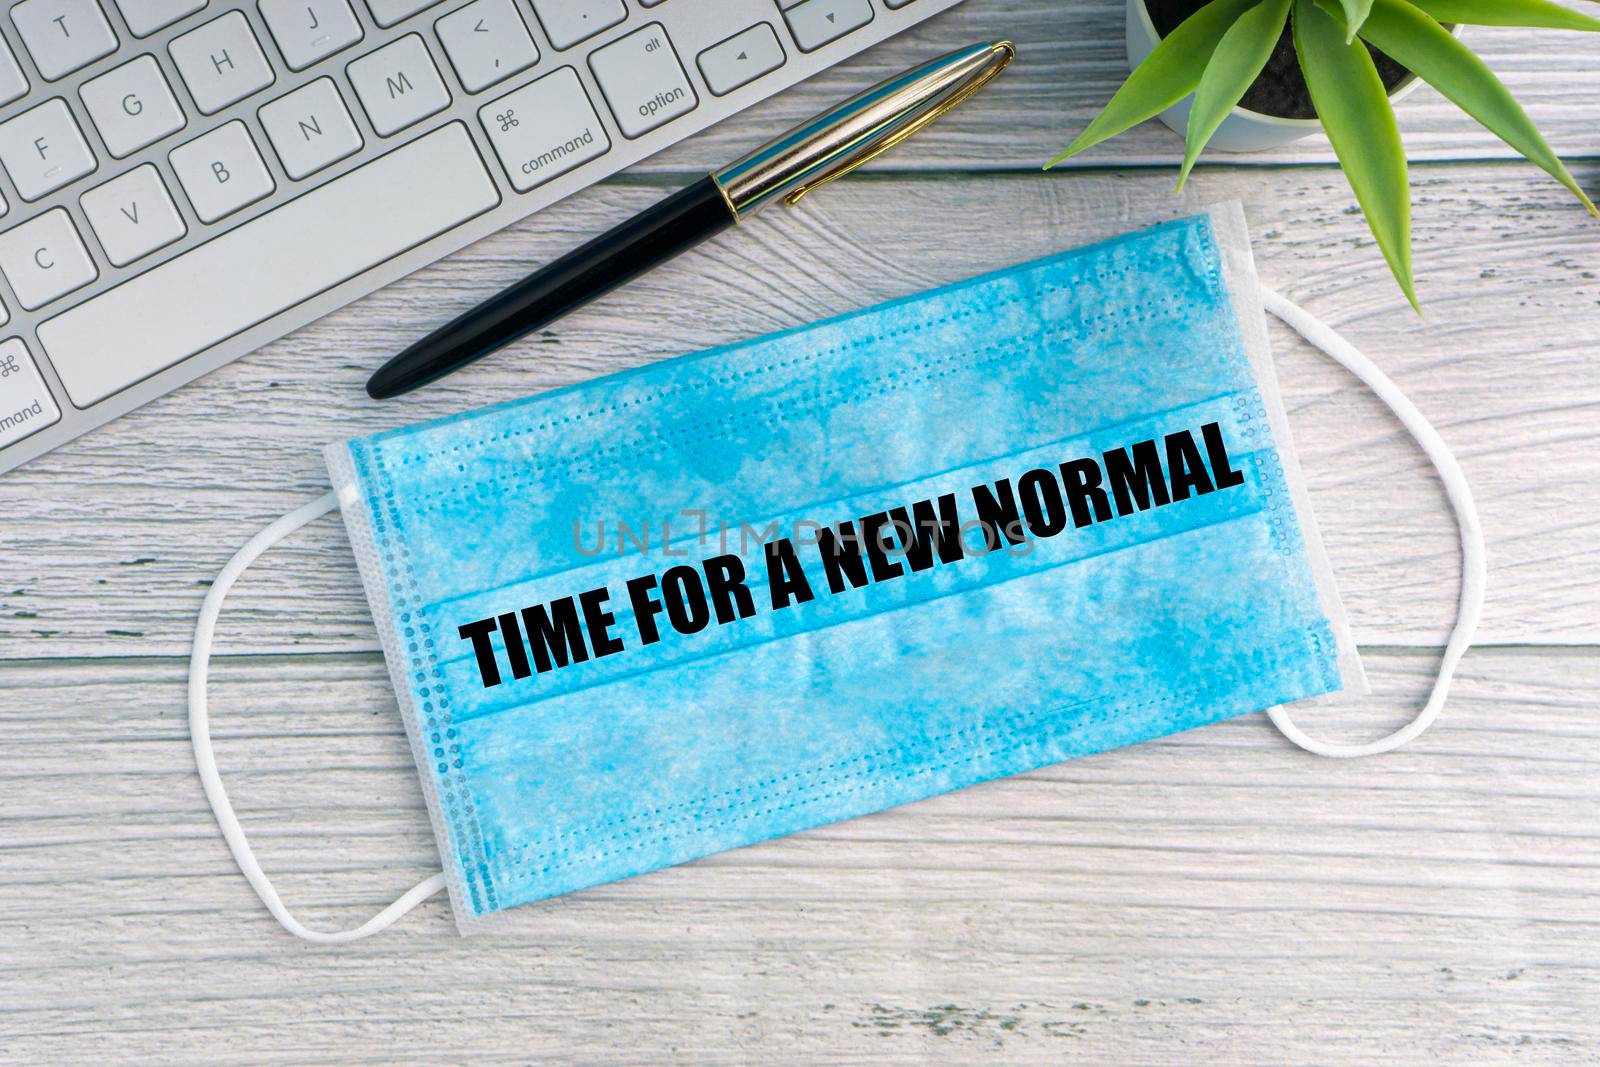 TIME FOR A NEW NORMAL text with safety face mask, keyboard, fountain pen and decorative plant on wooden background by silverwings